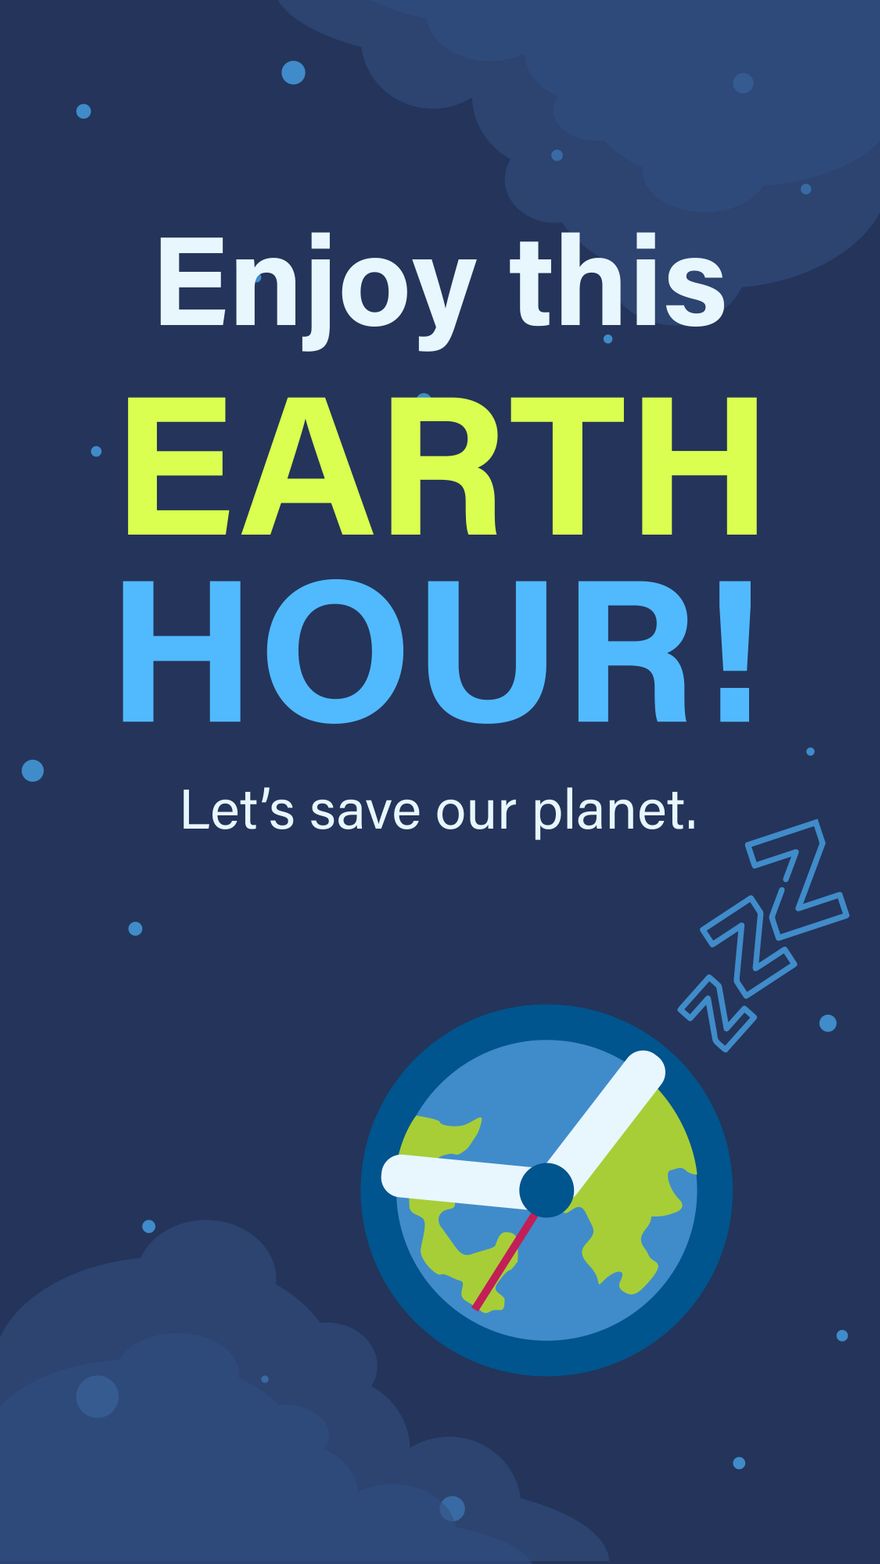 Free Earth Hour Whatsapp Poster in Illustrator, PSD, EPS, SVG, JPG, PNG